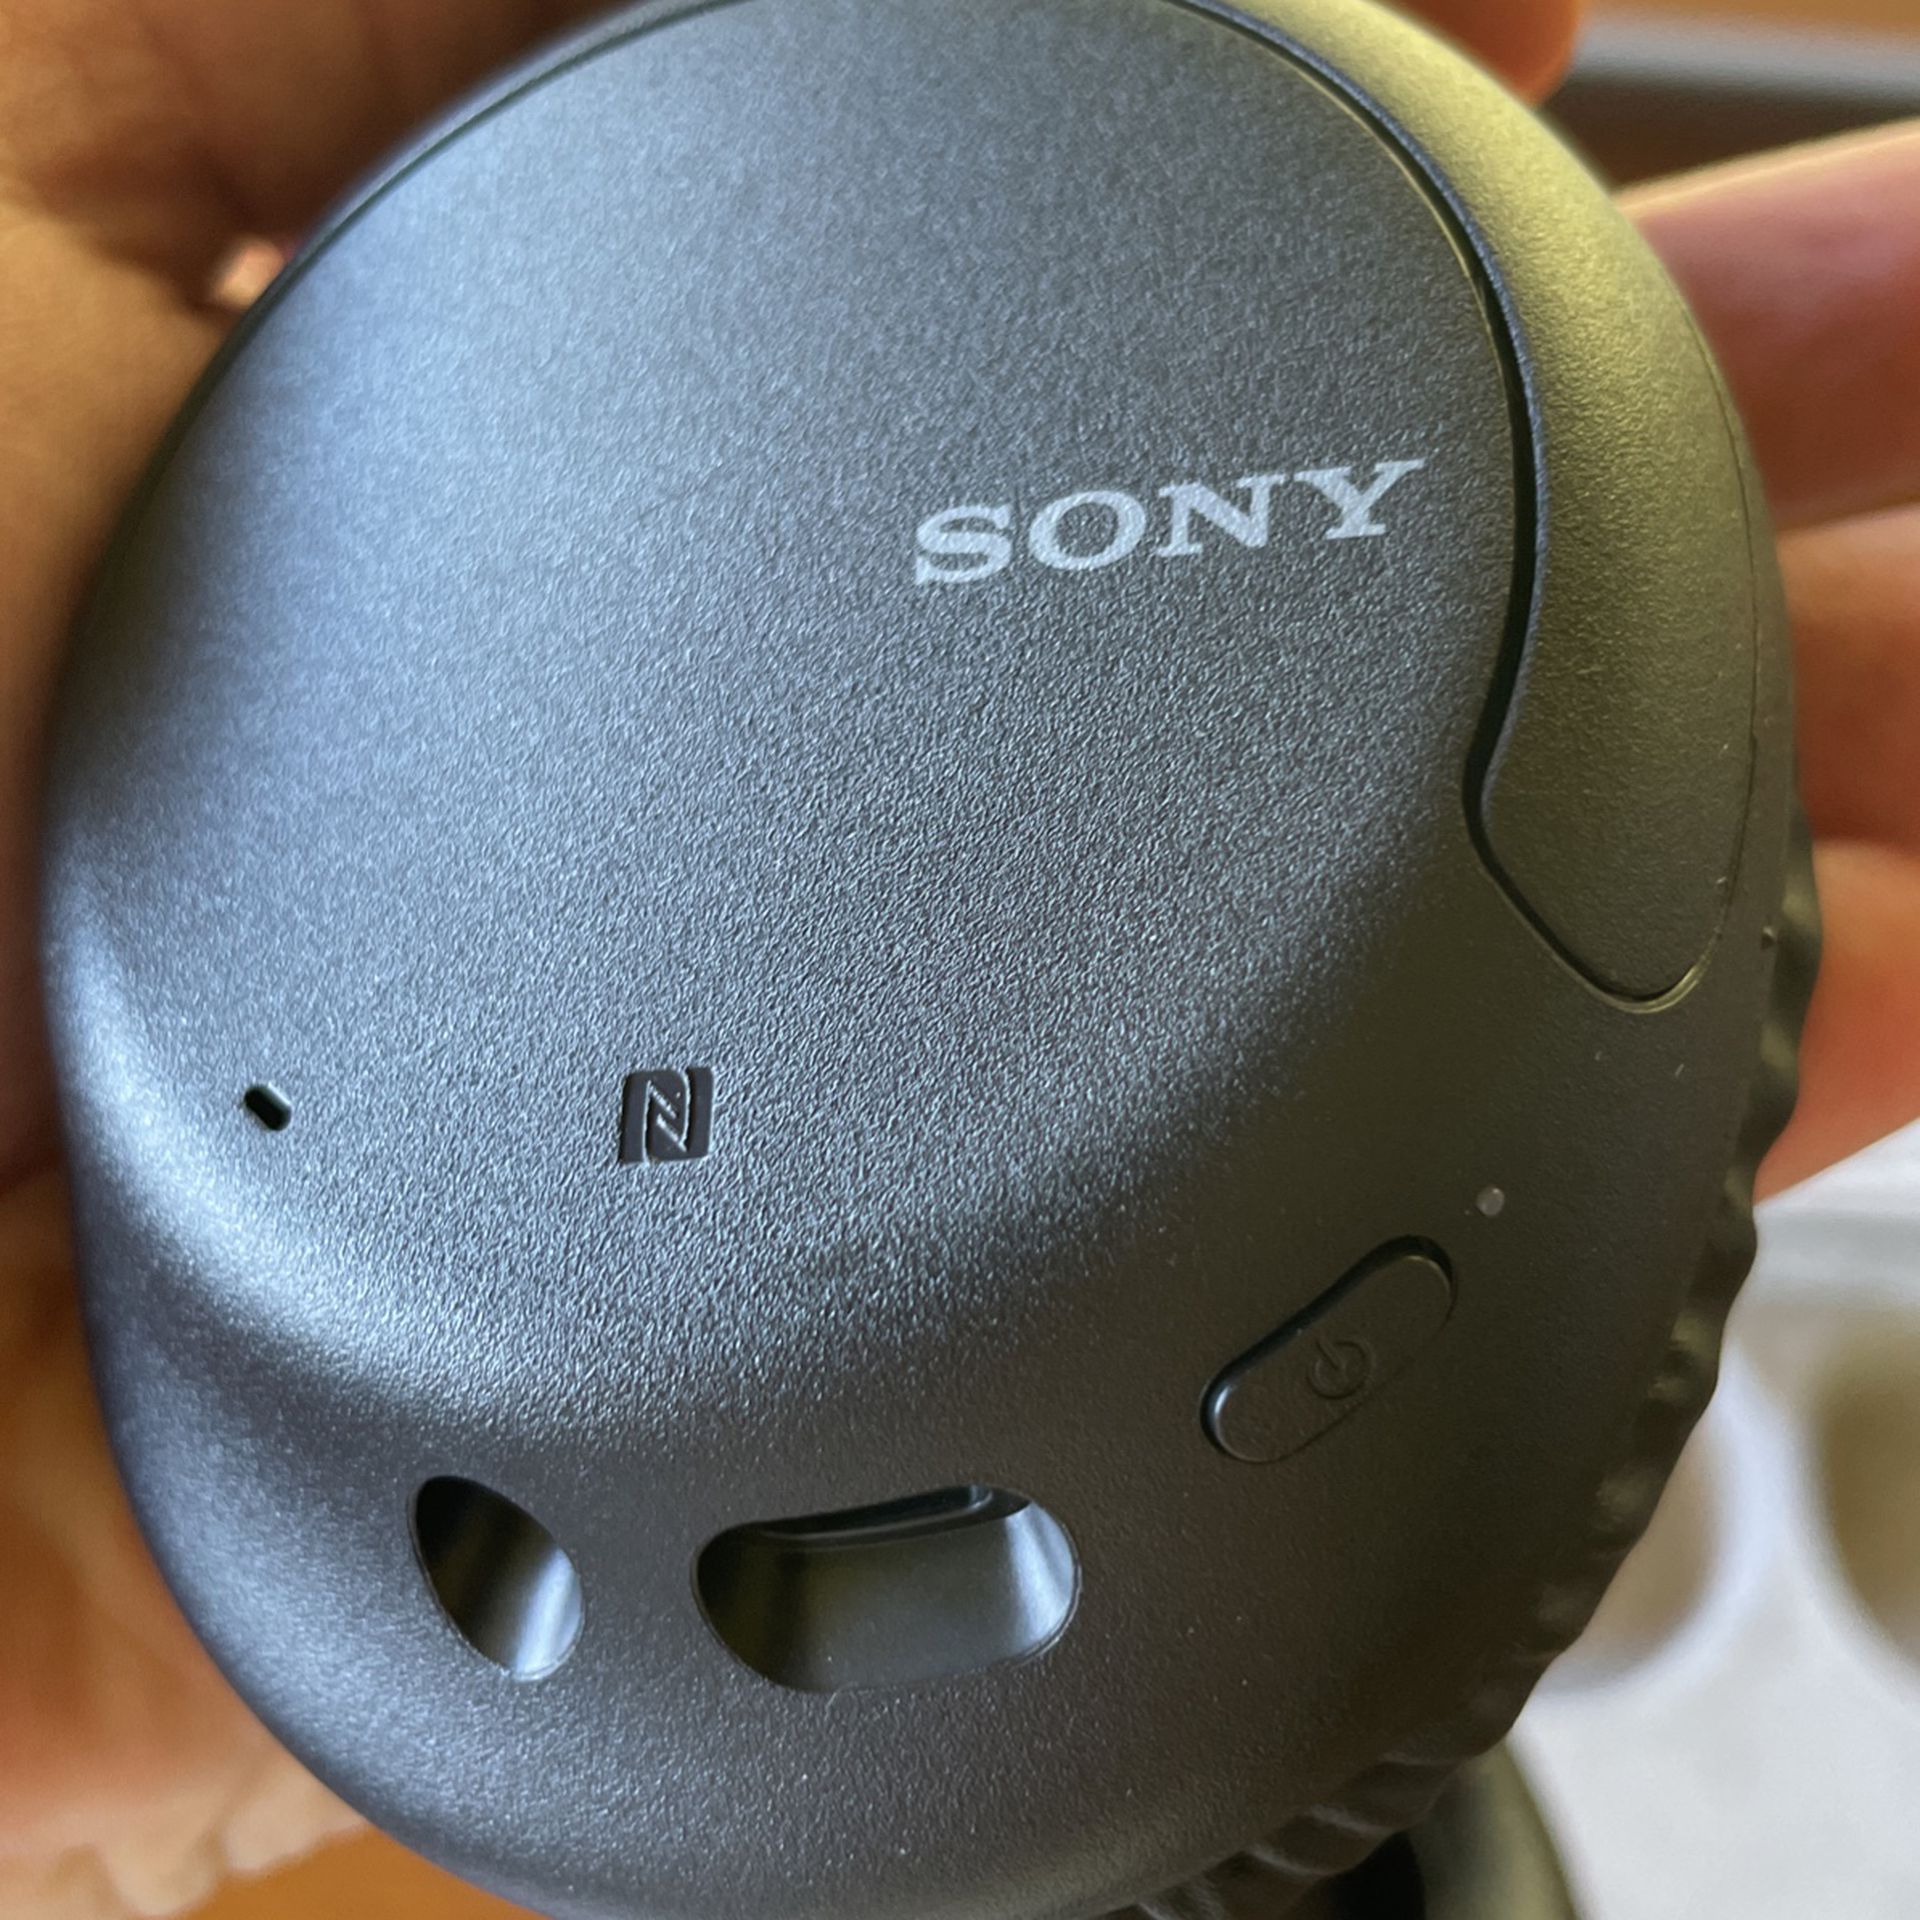 Sony noise Canceling Bluetooth Wireless Headphones With Case